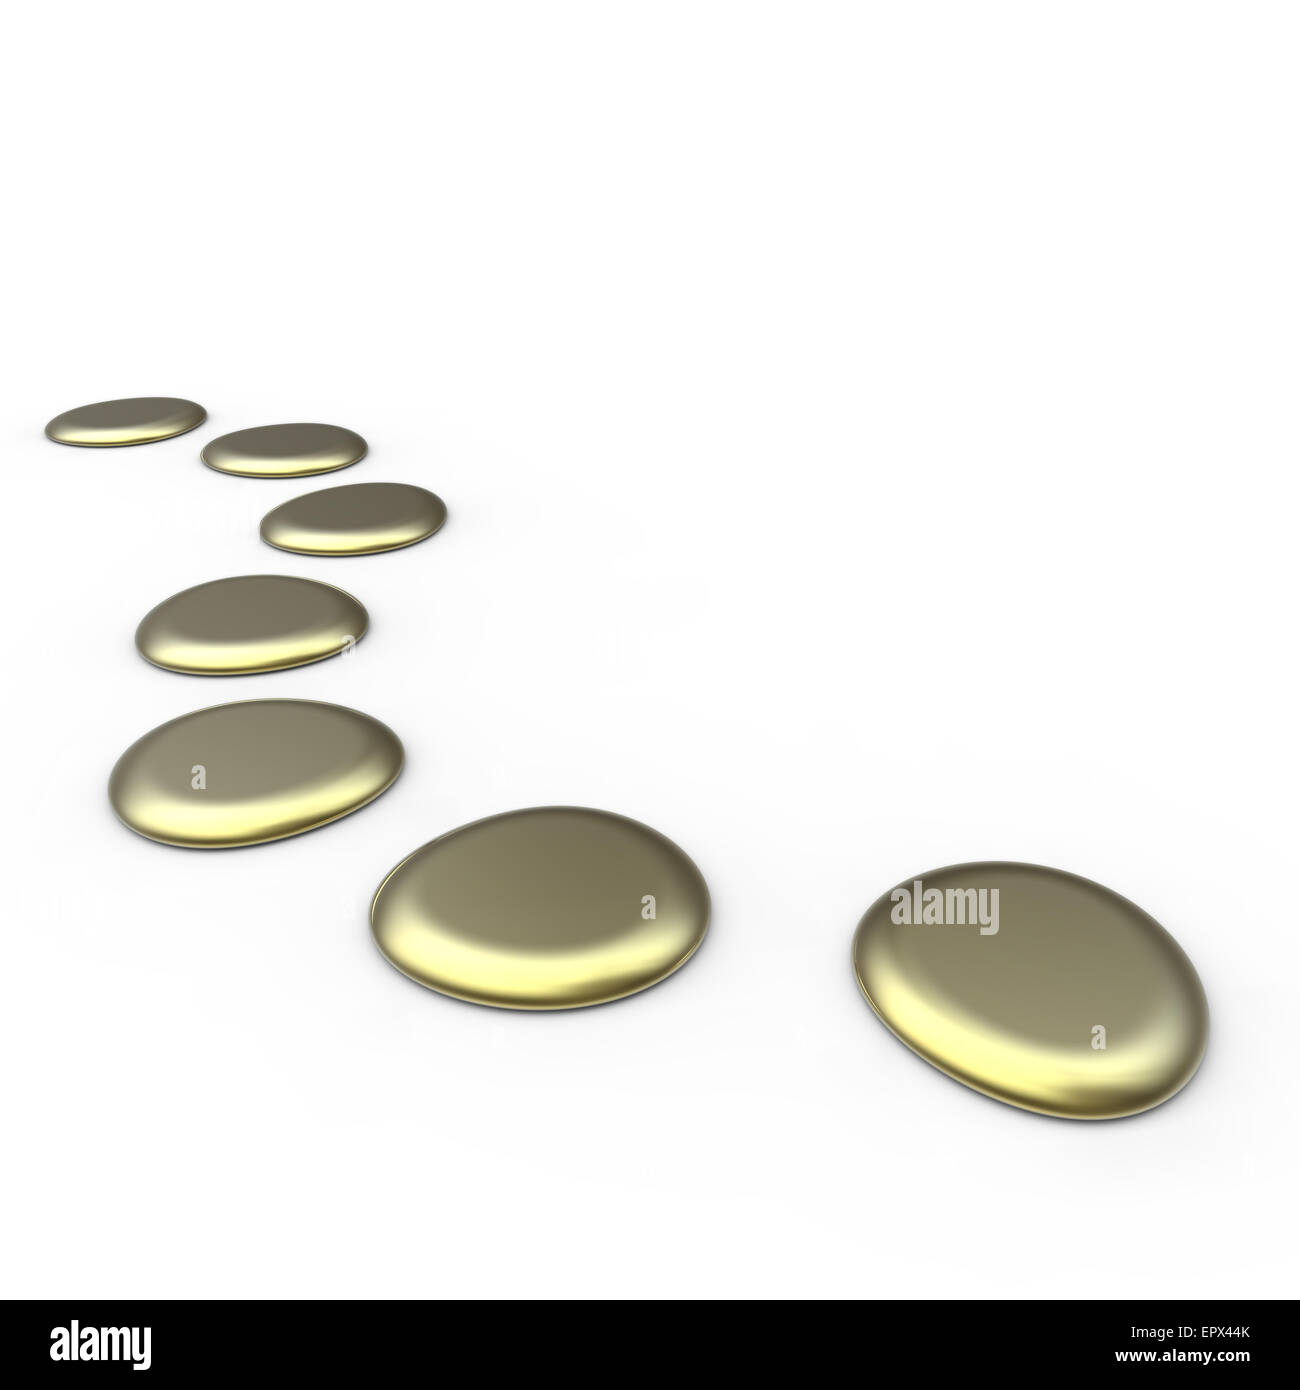 Winding path with gold colored stepping stones on a white background Stock Photo